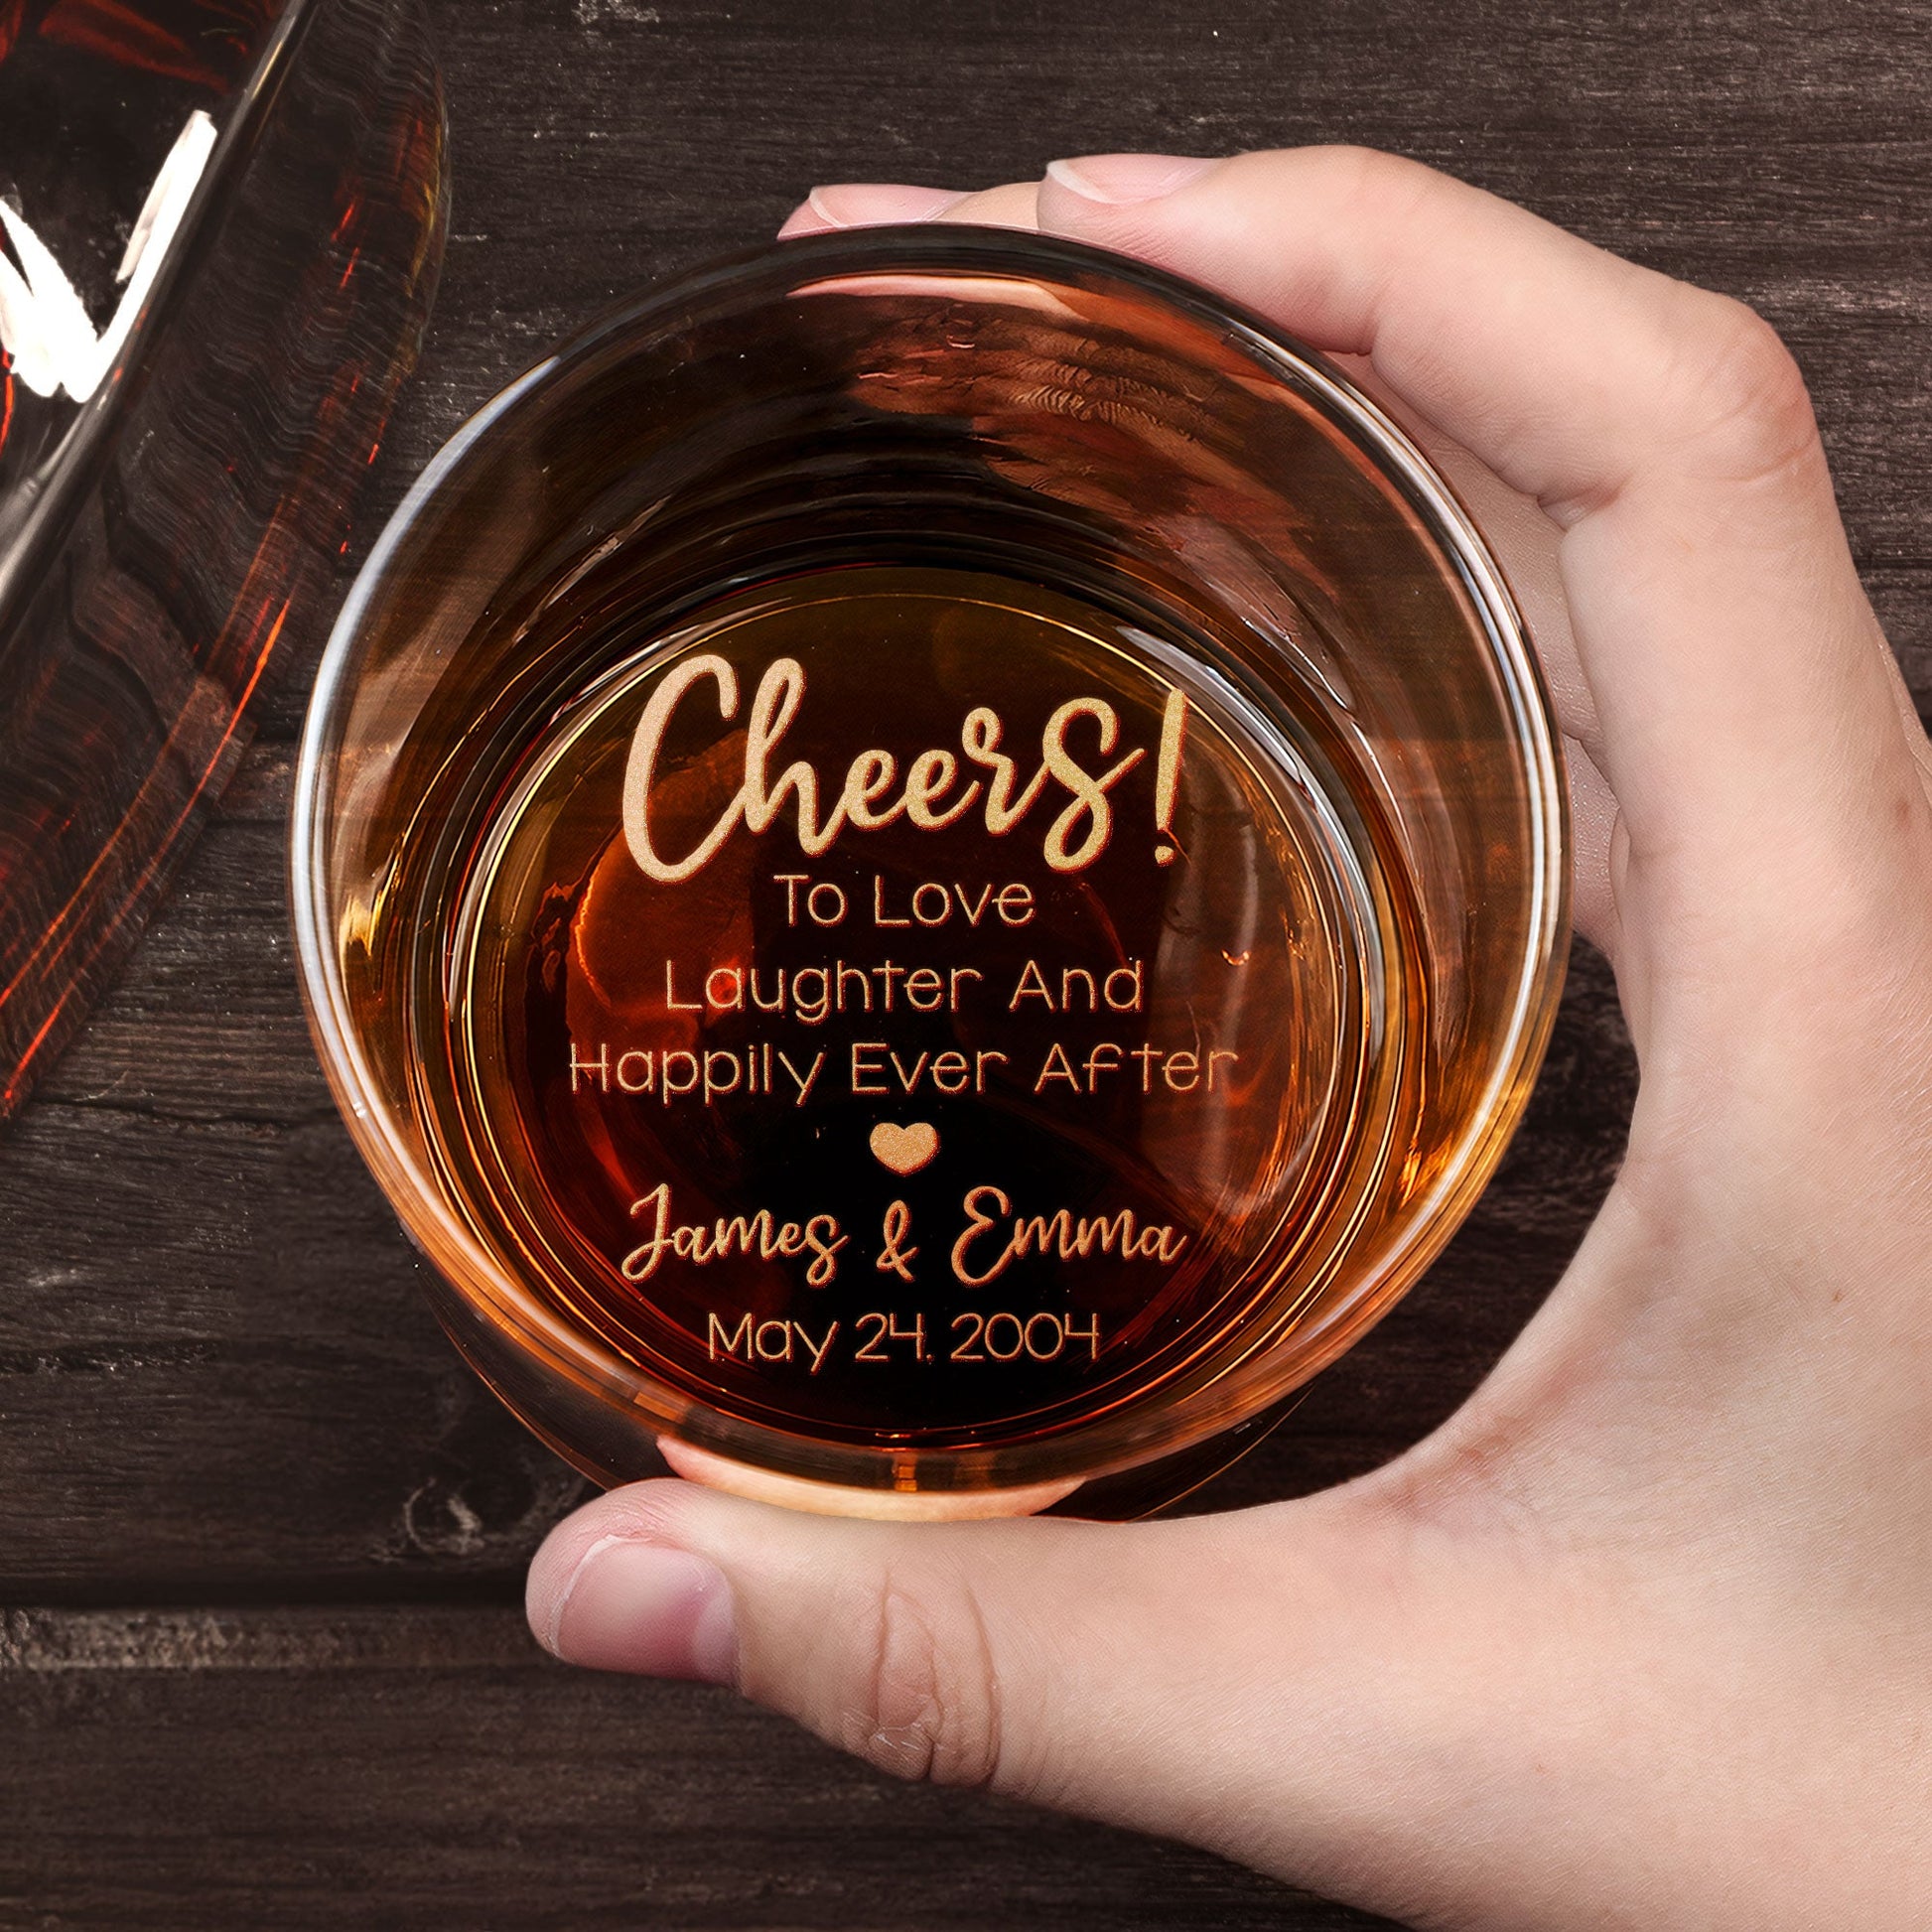 Cheers To Love Laughter & Happily Ever After - Personalized Engraved Whiskey Glass